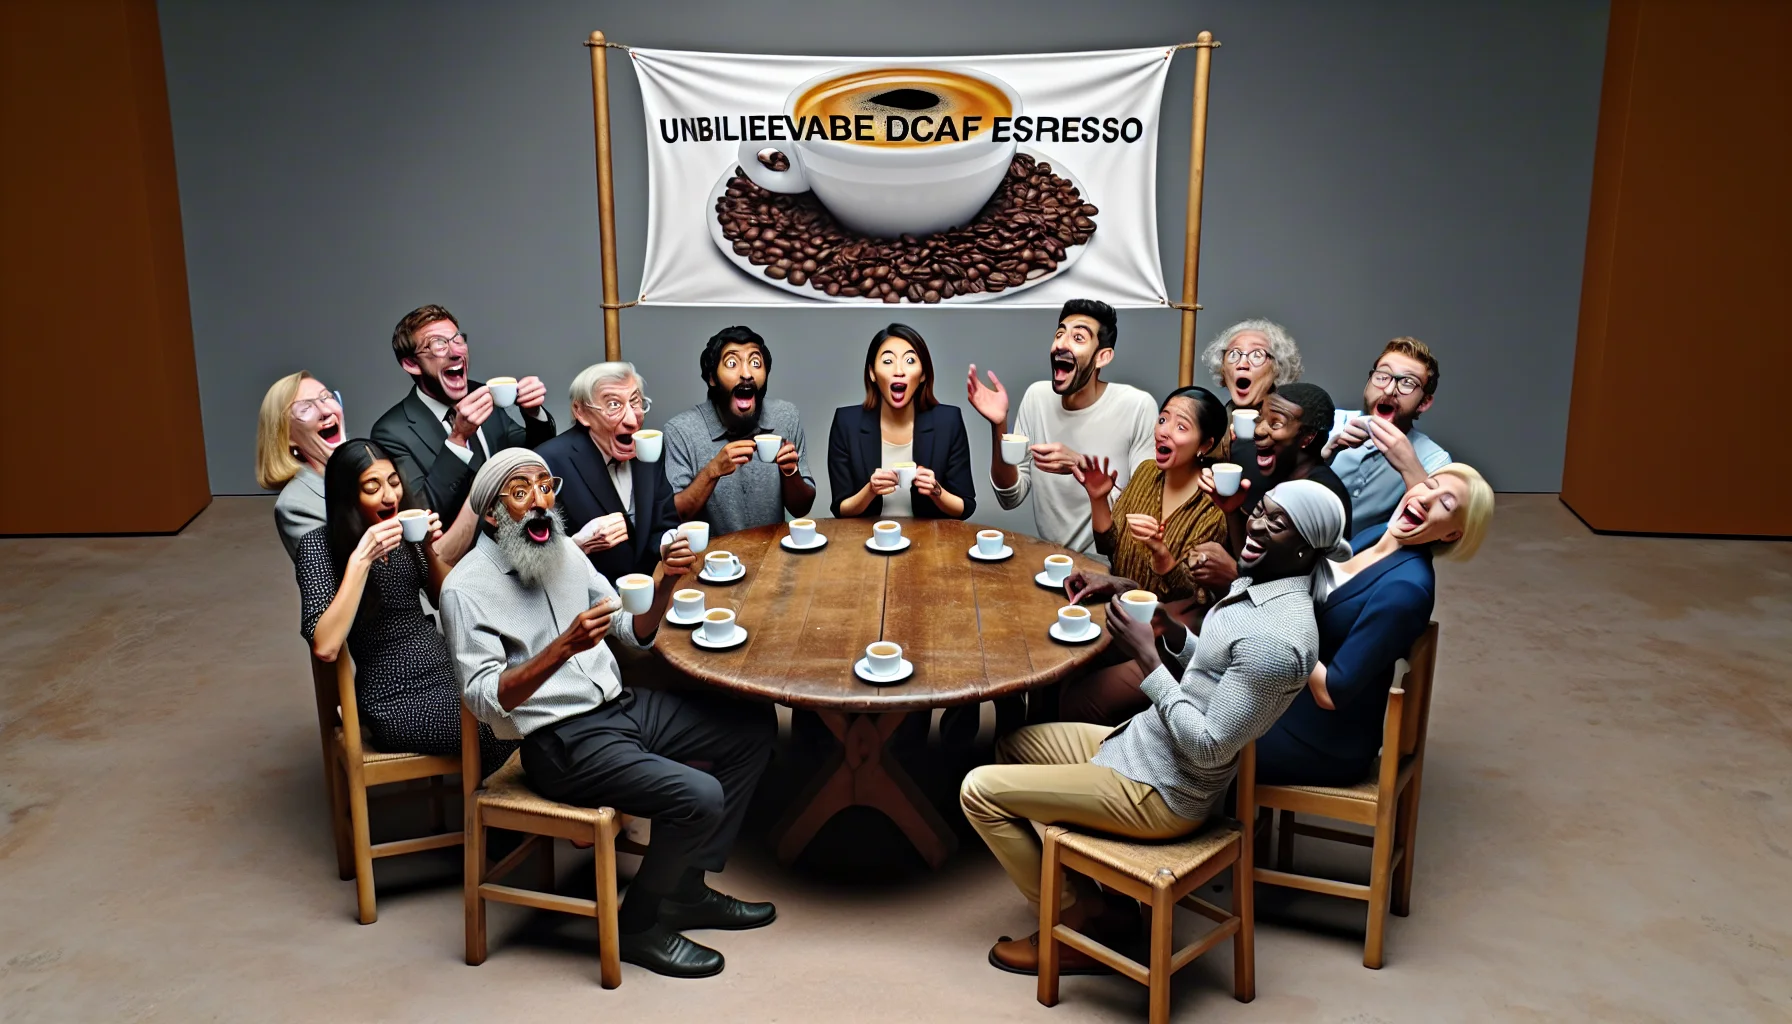 Generate an image depicting a humorous scene designed to inspire people to enjoy decaf espresso. Perhaps there is a merry group sitting around a circular wooden table, filled with multicultural people from diverse descents such as Caucasian, Hispanic, Middle-Eastern, South Asian, and Black, all indulging in small cups of decaf espresso with wide smiles on their faces. The expressions on their faces imply surprise at how flavorful and enjoyable the decaf espresso is. Also, there's a tall stand-up banner placed searingly nearby, displaying the text 'Unbelievable Decaf Espresso', helping to accentuate the comedic nature of their reactions.